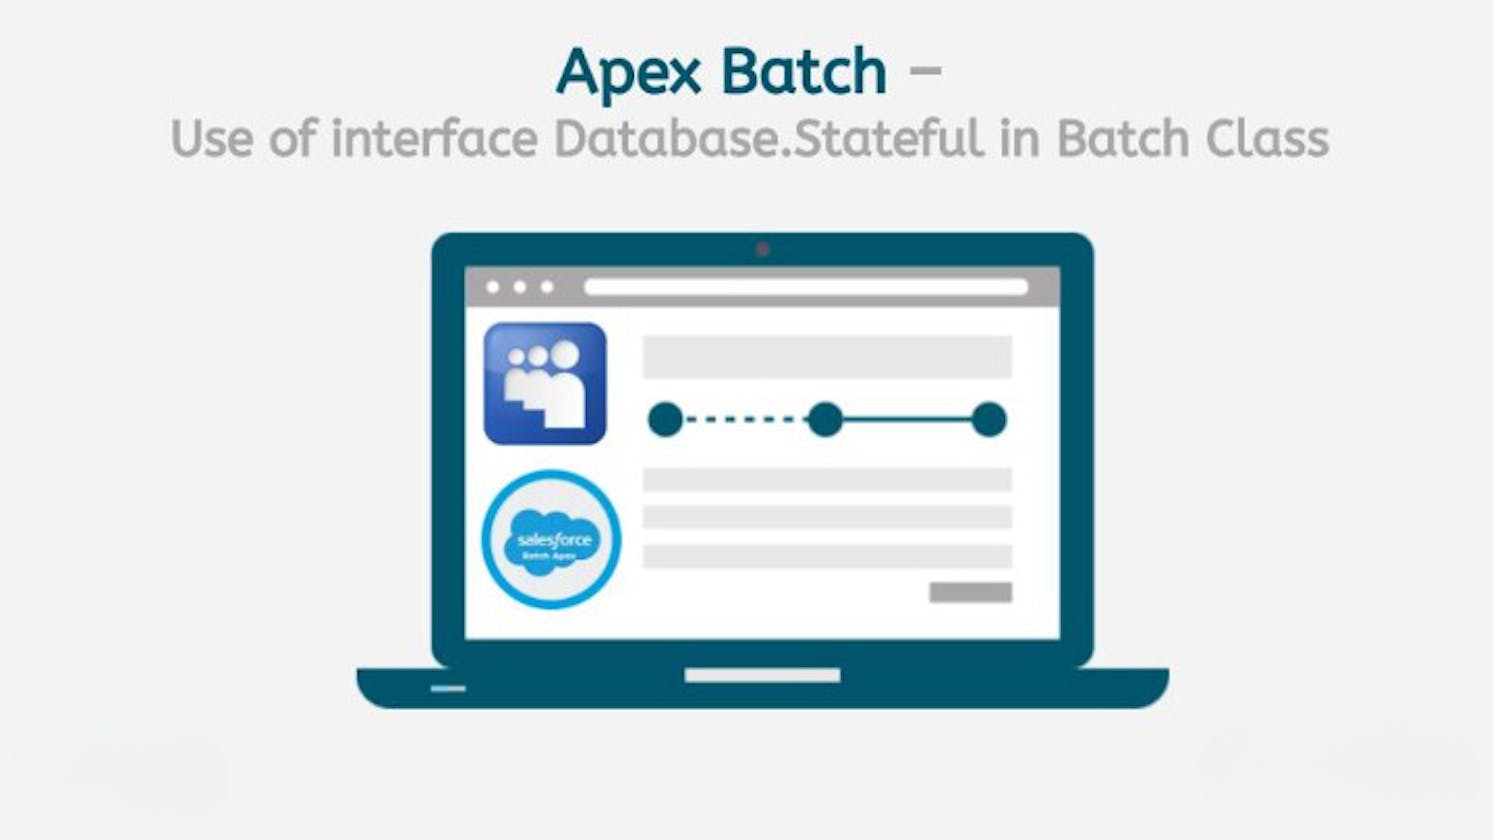 "Mastering Apex Batch Processing in Salesforce"